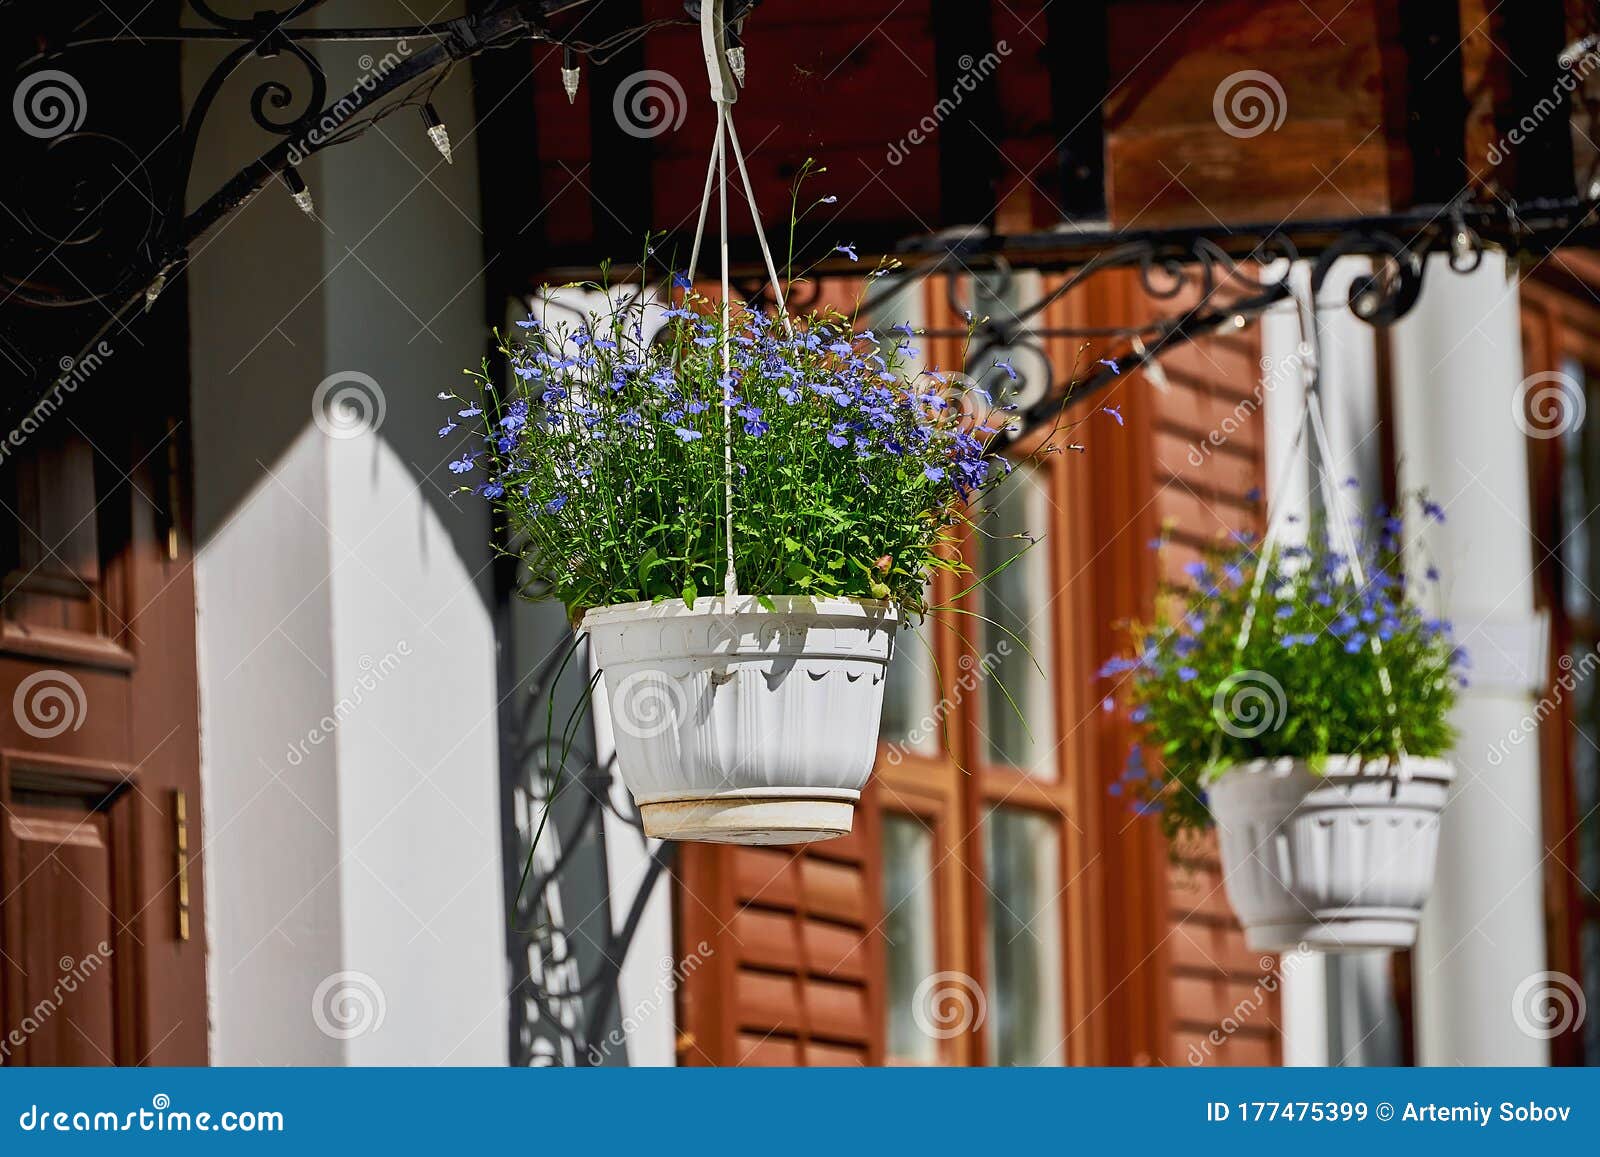 beautiful blue flowers in a hanging planter. decorative white pots with blue flowers in summer